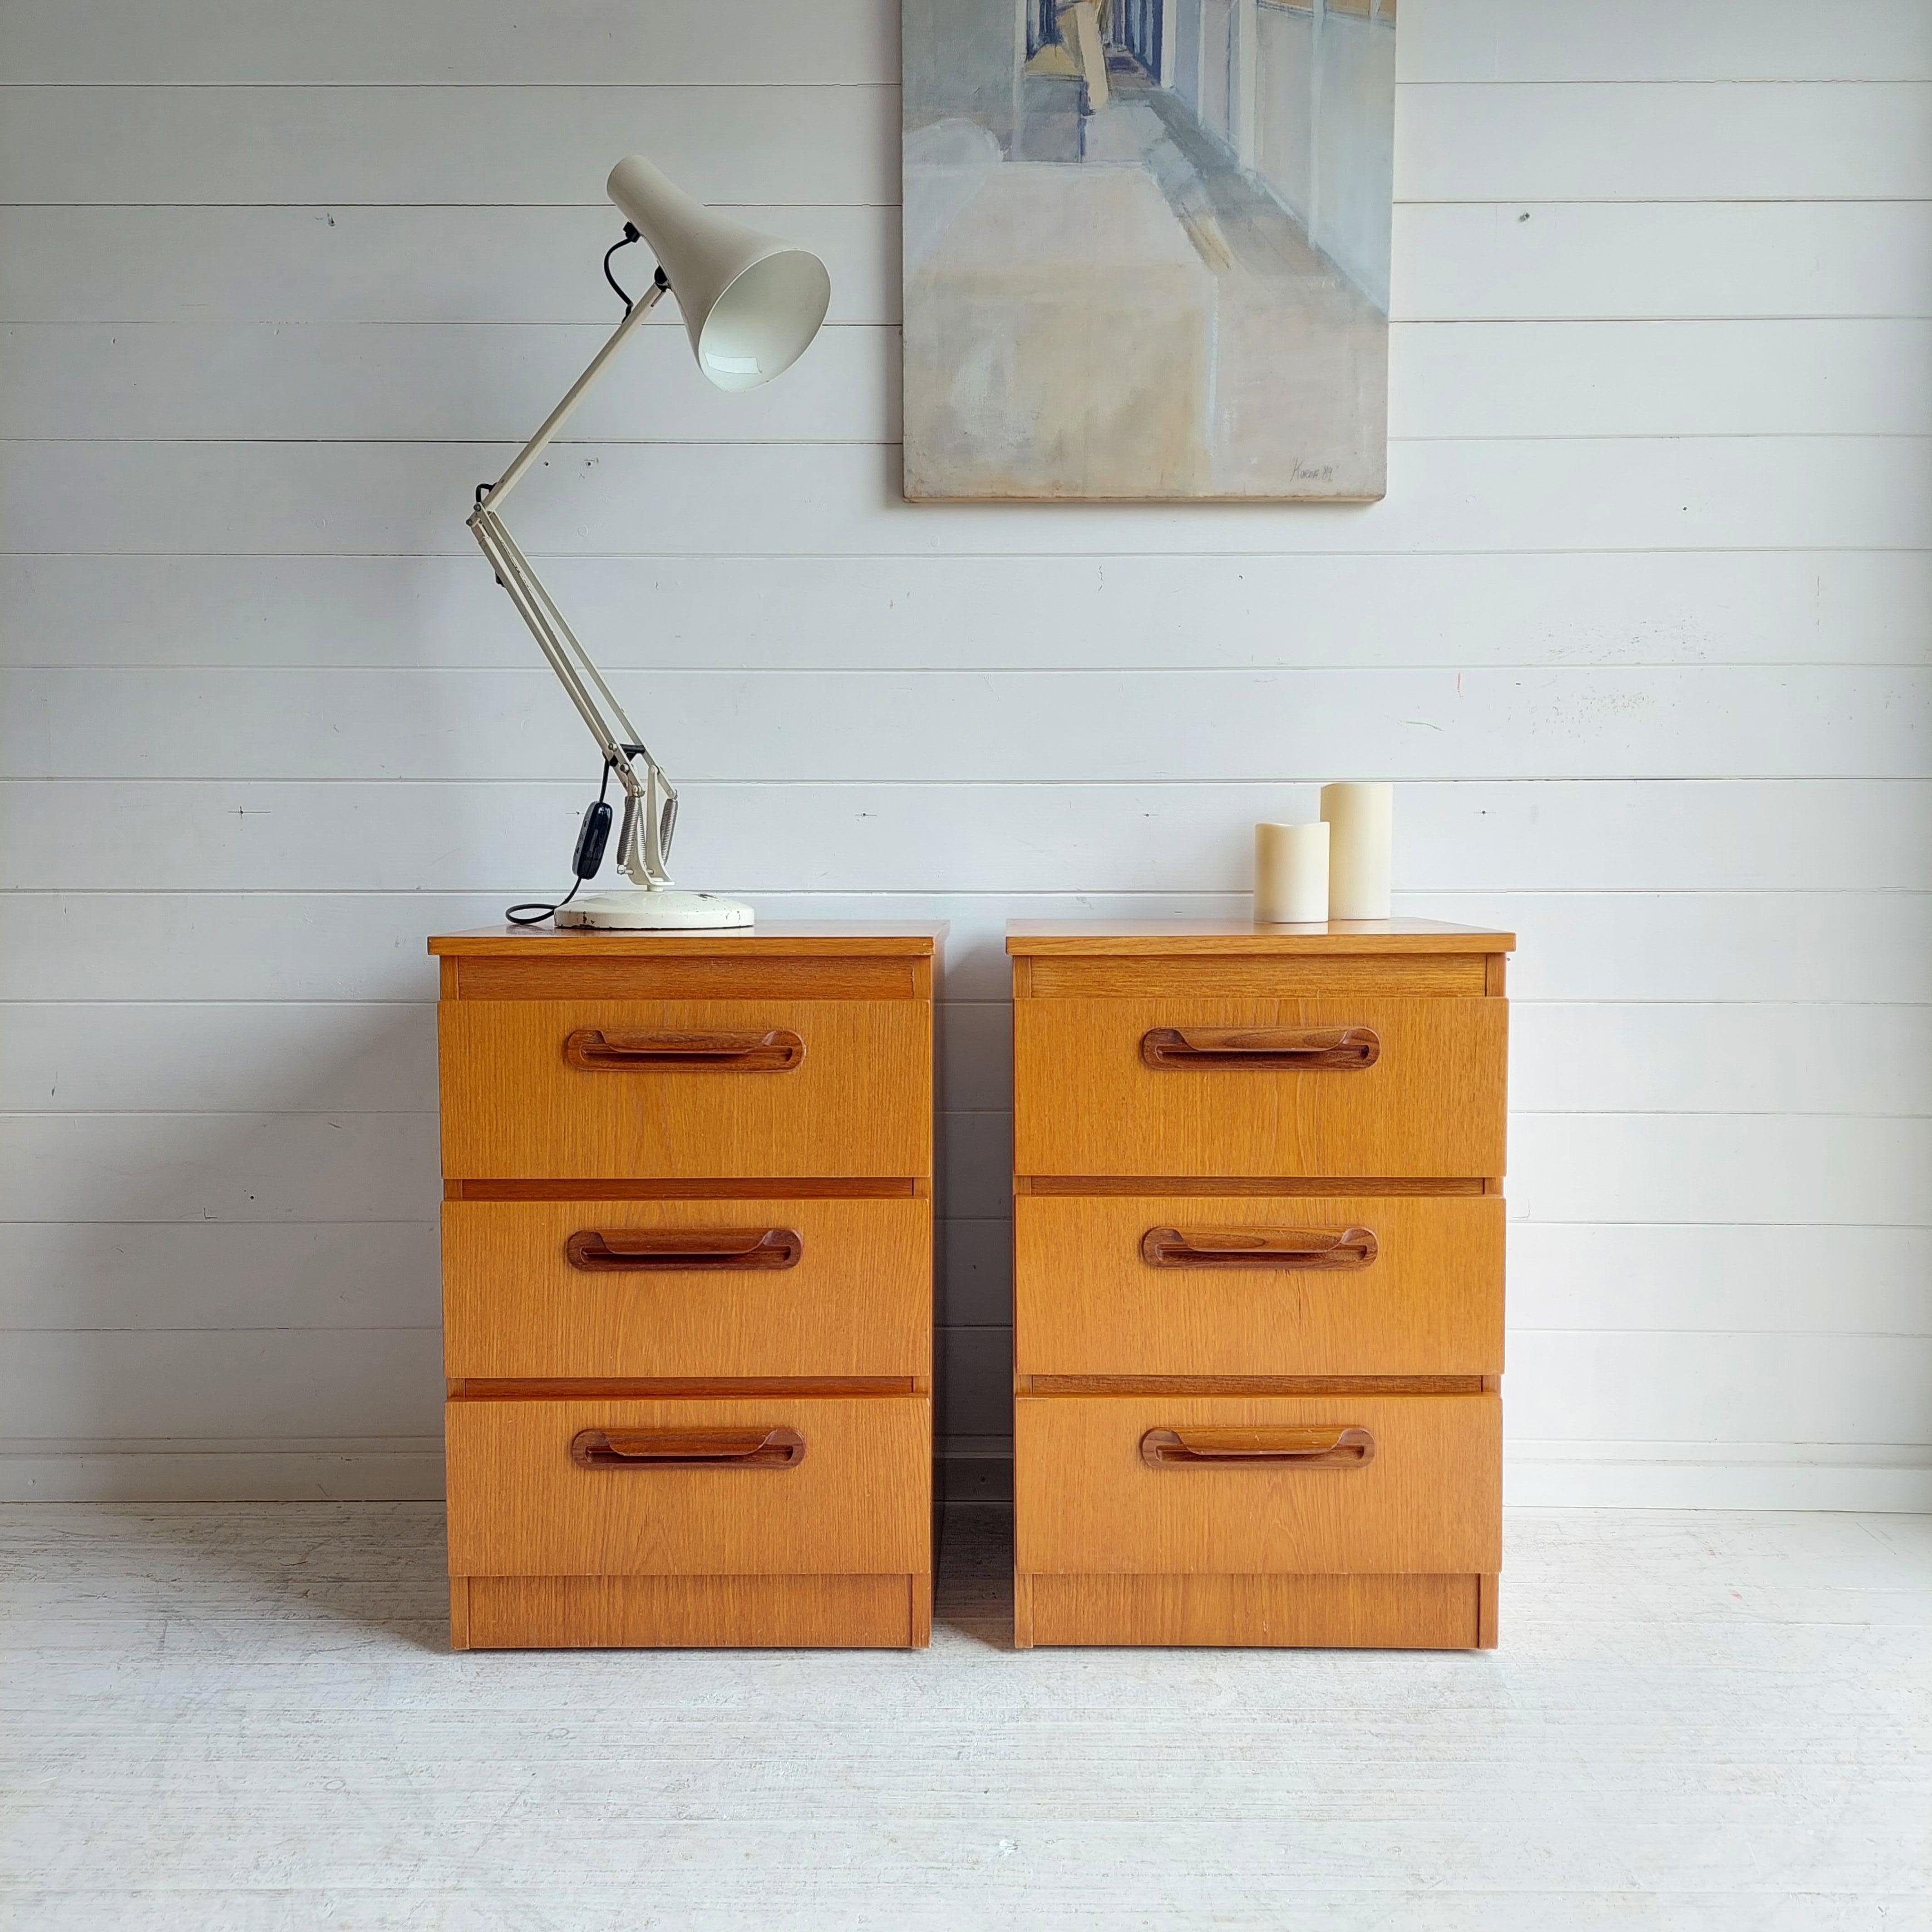 A really smart JS Sakol retro teak veneer three drawer matching pair of drawers / bedside cabinets, circa 1970s.

Teak drawers by J. S. Sakol  with similarities to the G Plan Fresco range.
This delightful  pair of chest of drawers was designed and